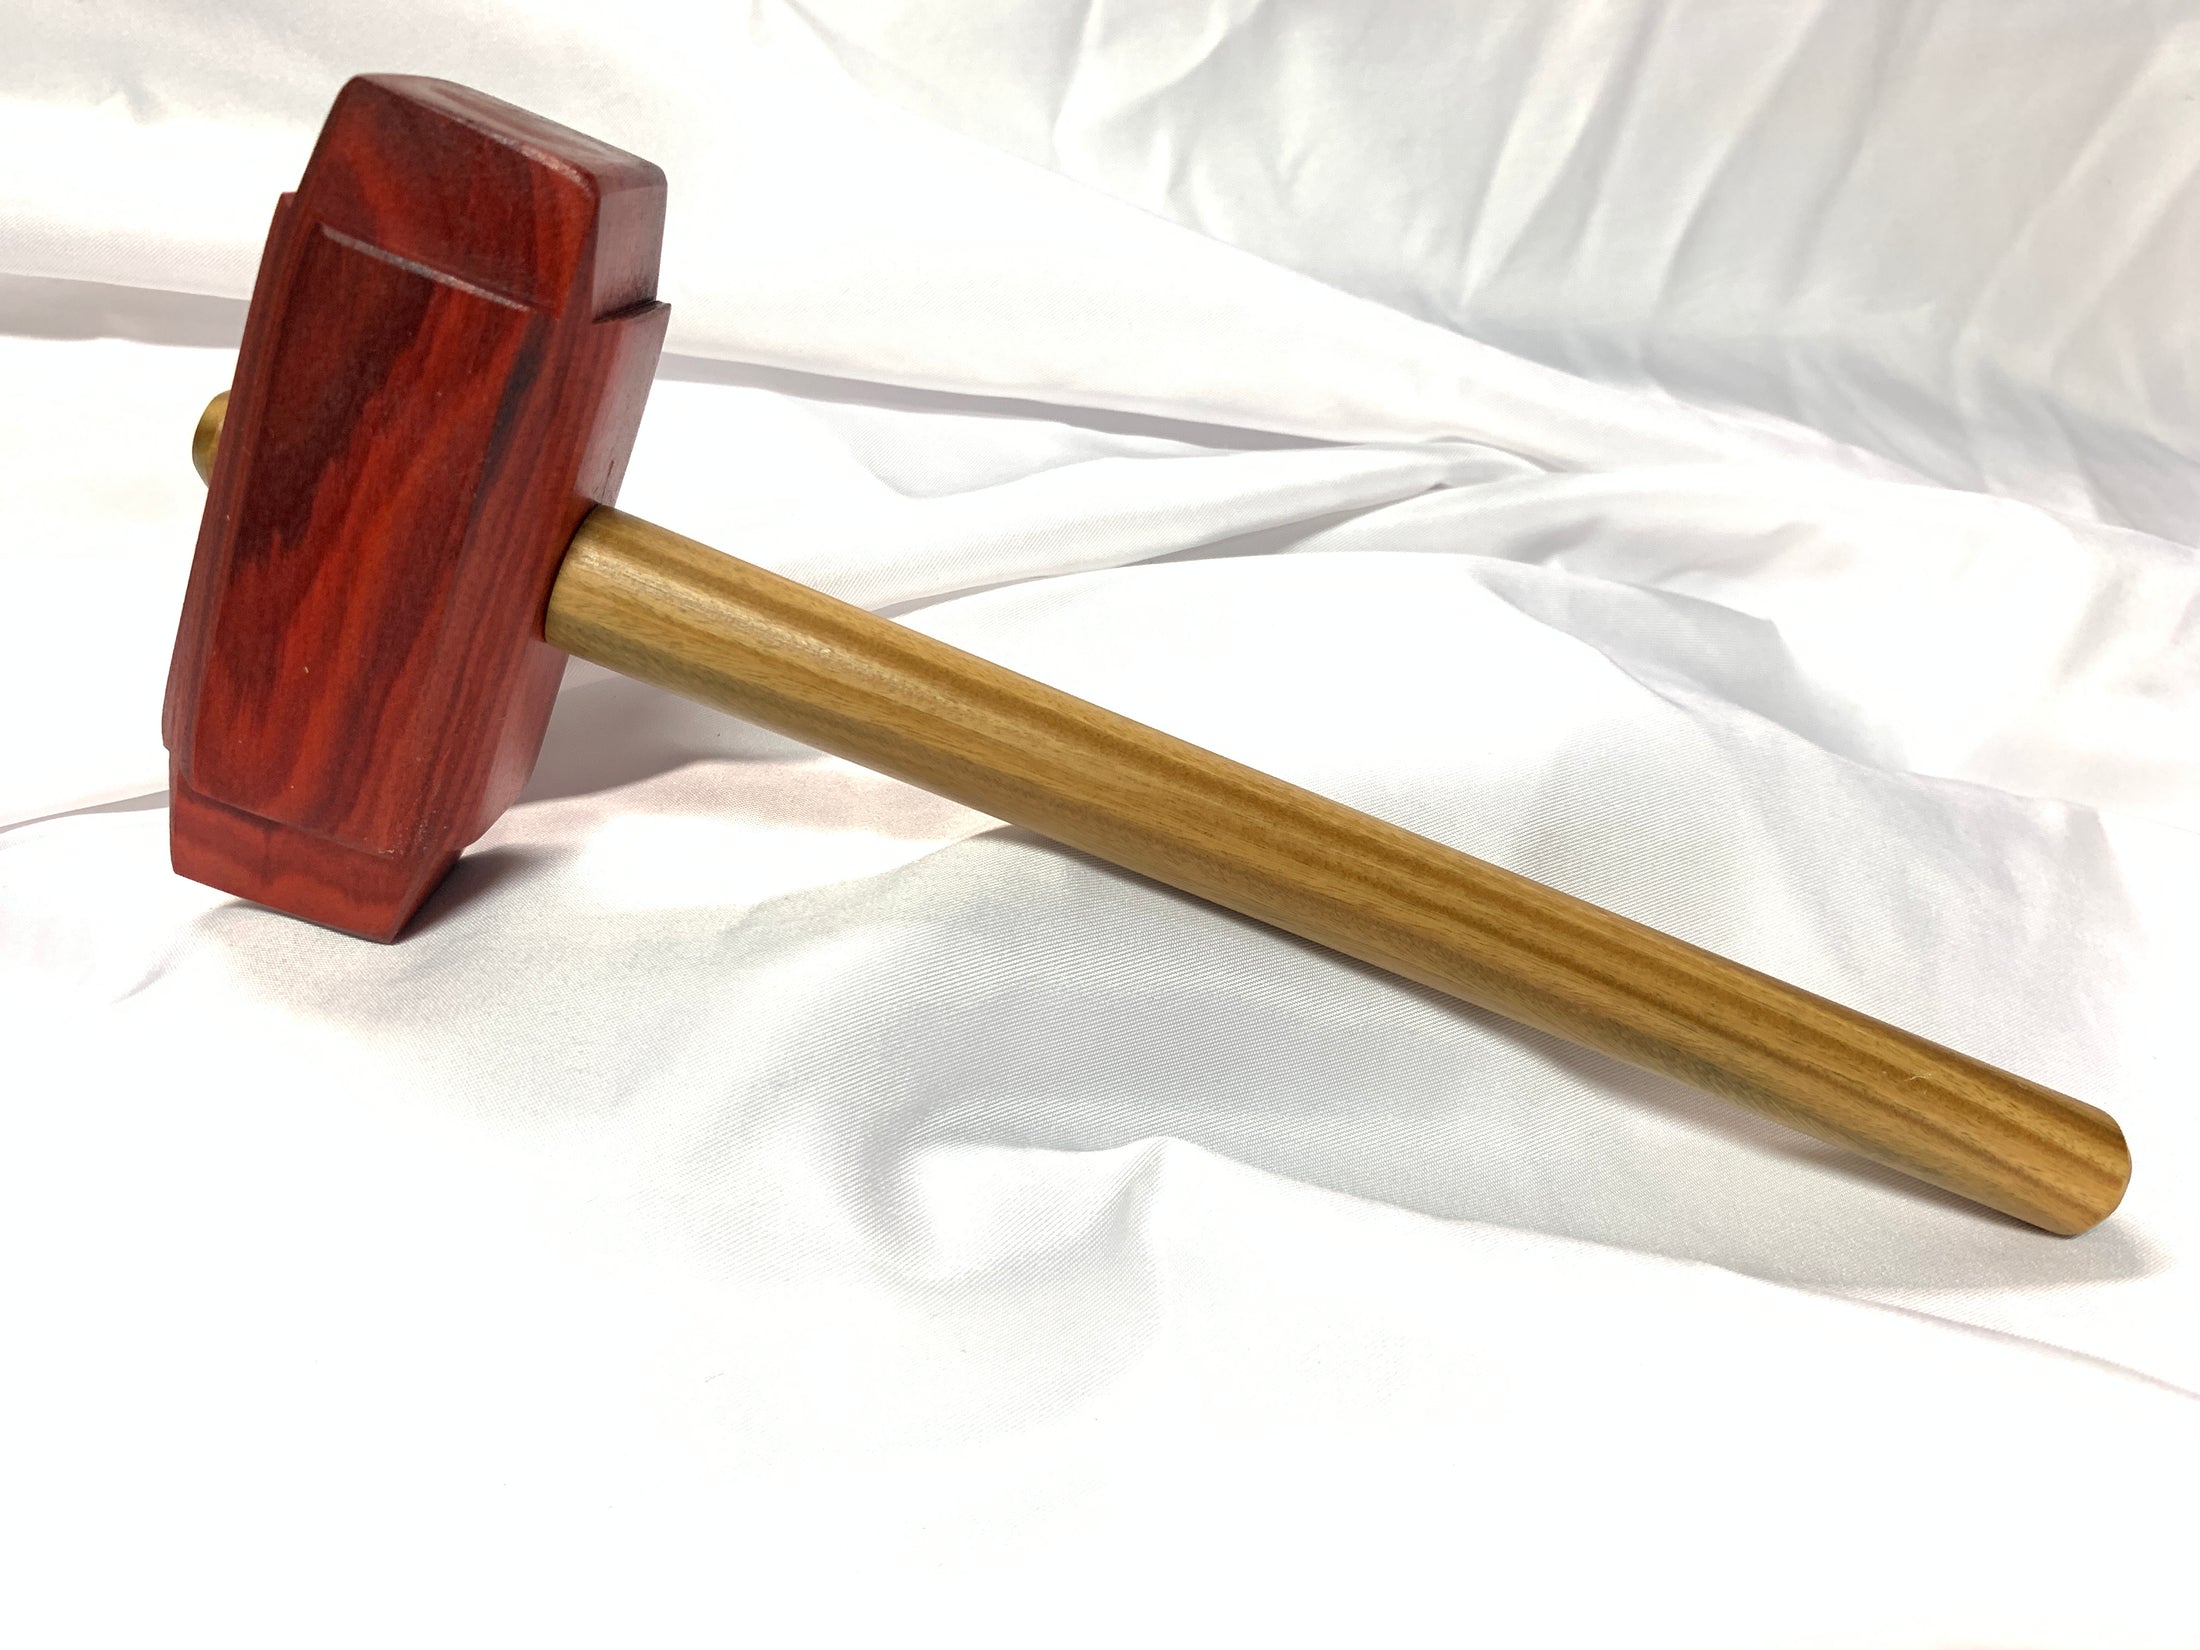 Thors Hammer Woodworking Mallet Redheart Head with Lignum Vitae Handle Kings Fine Woodworking